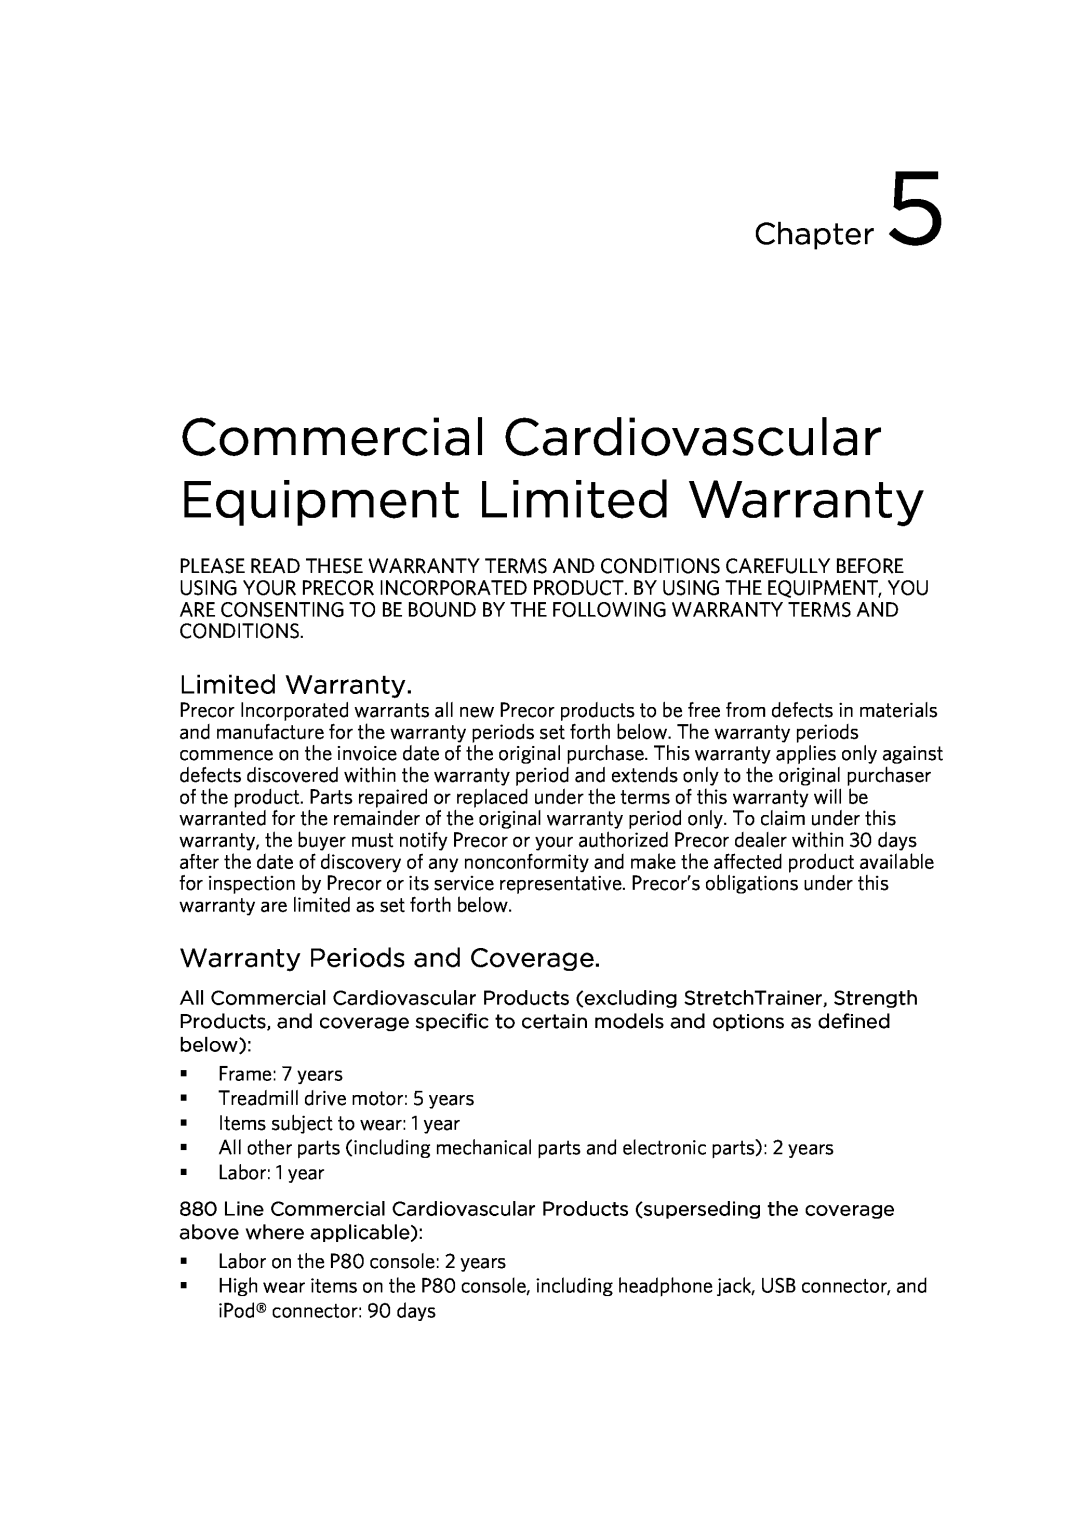 Precor P30 manual Commercial Cardiovascular Equipment Limited Warranty, Warranty Periods and Coverage, Chapter 